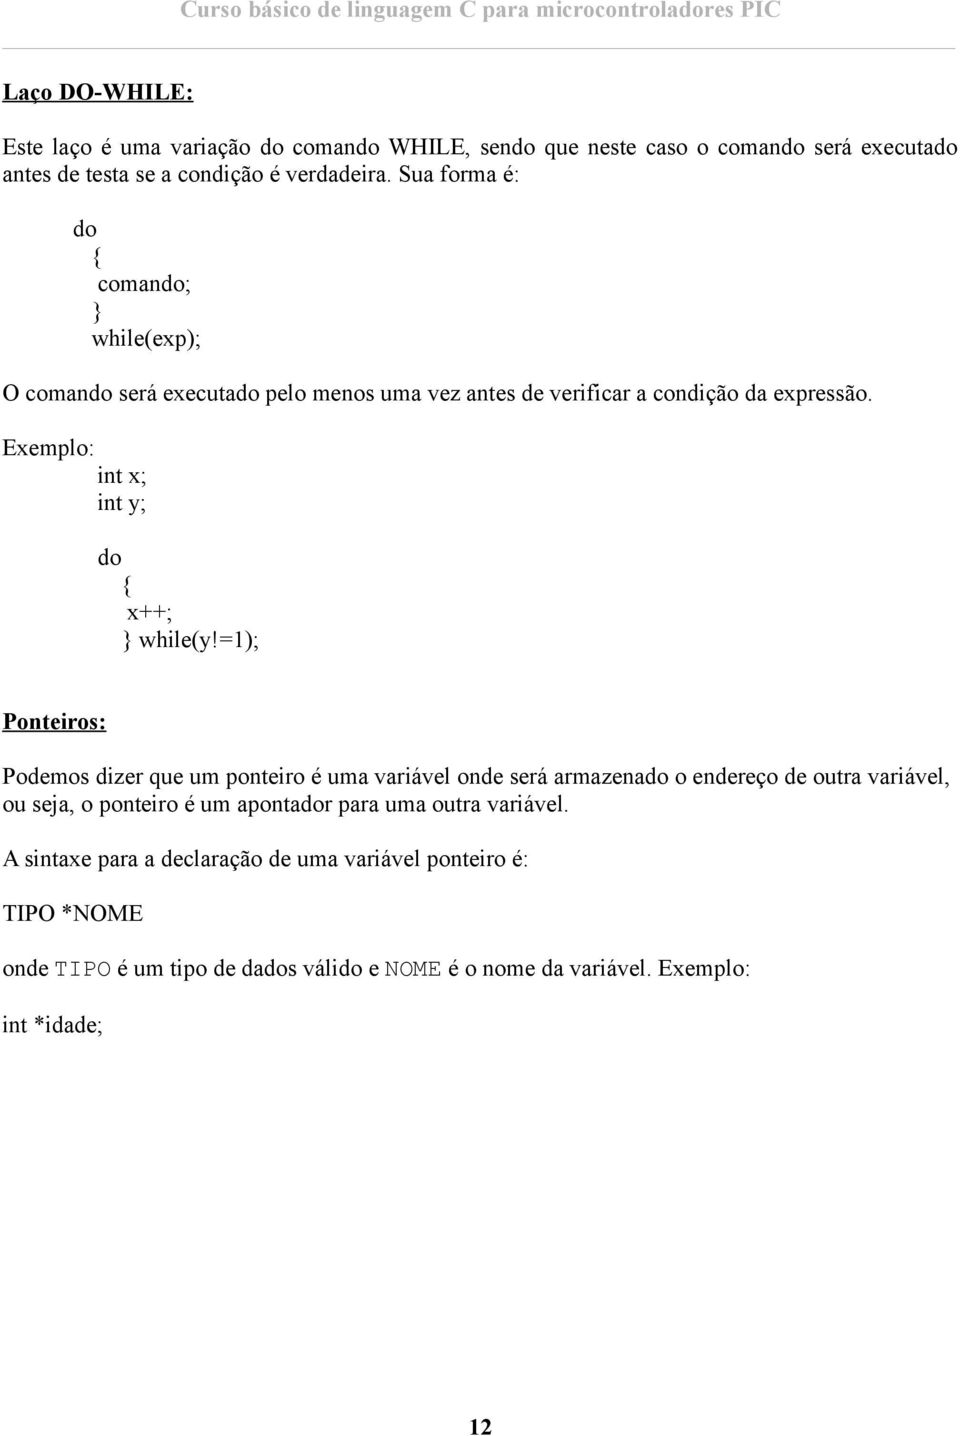 Exemplo: int x; int y; do x++; while(y!